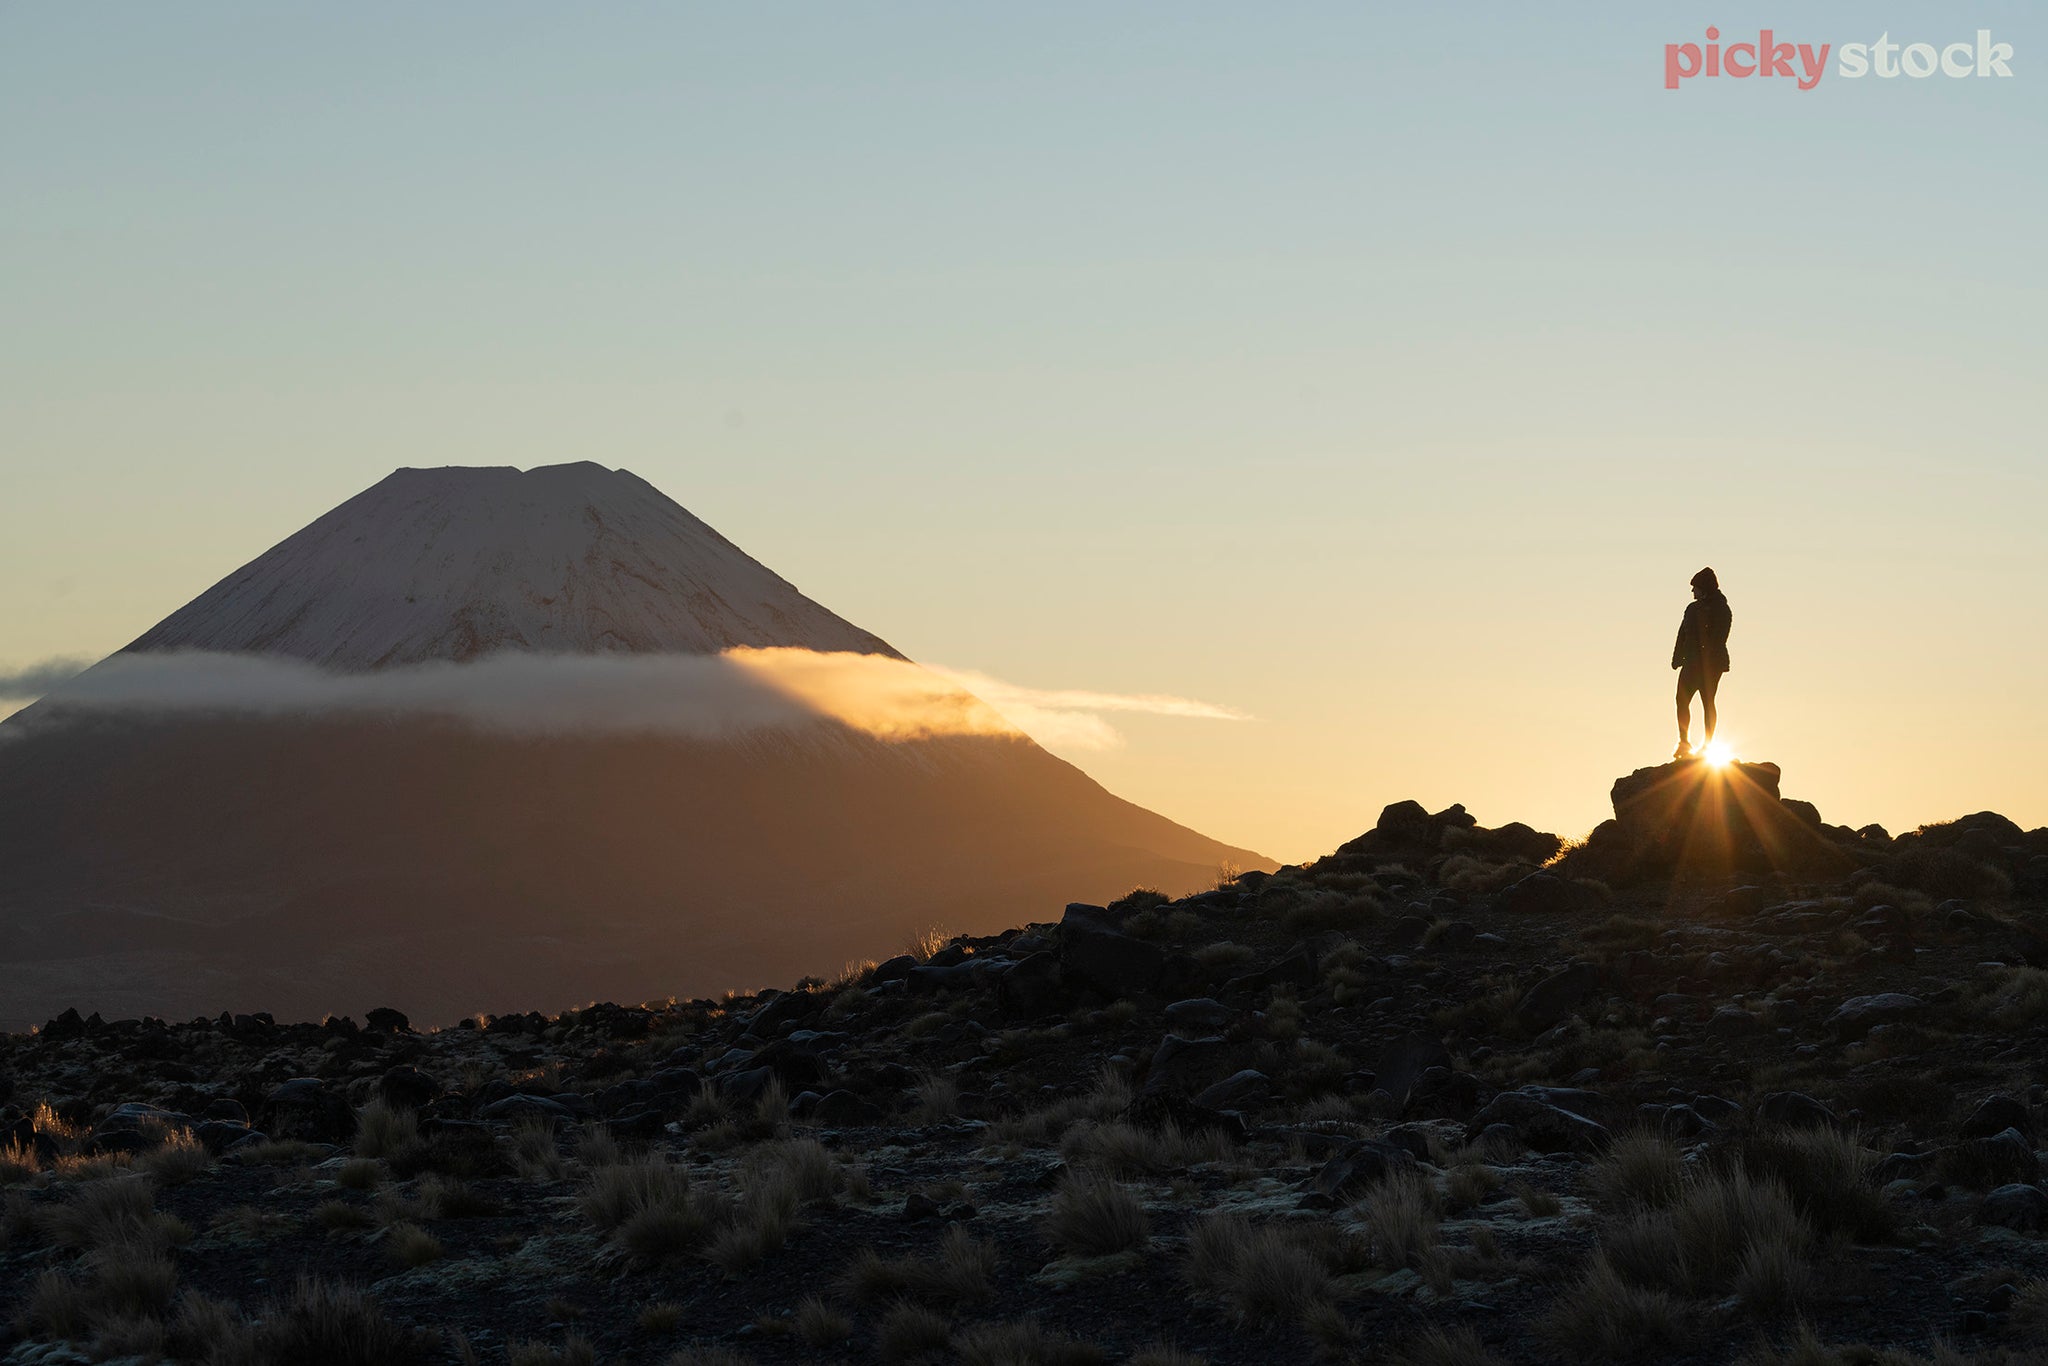 Solo framel tramper / hiker looking across at Mt Ngauruhoe from Mt Ruapehu at sunrise. 